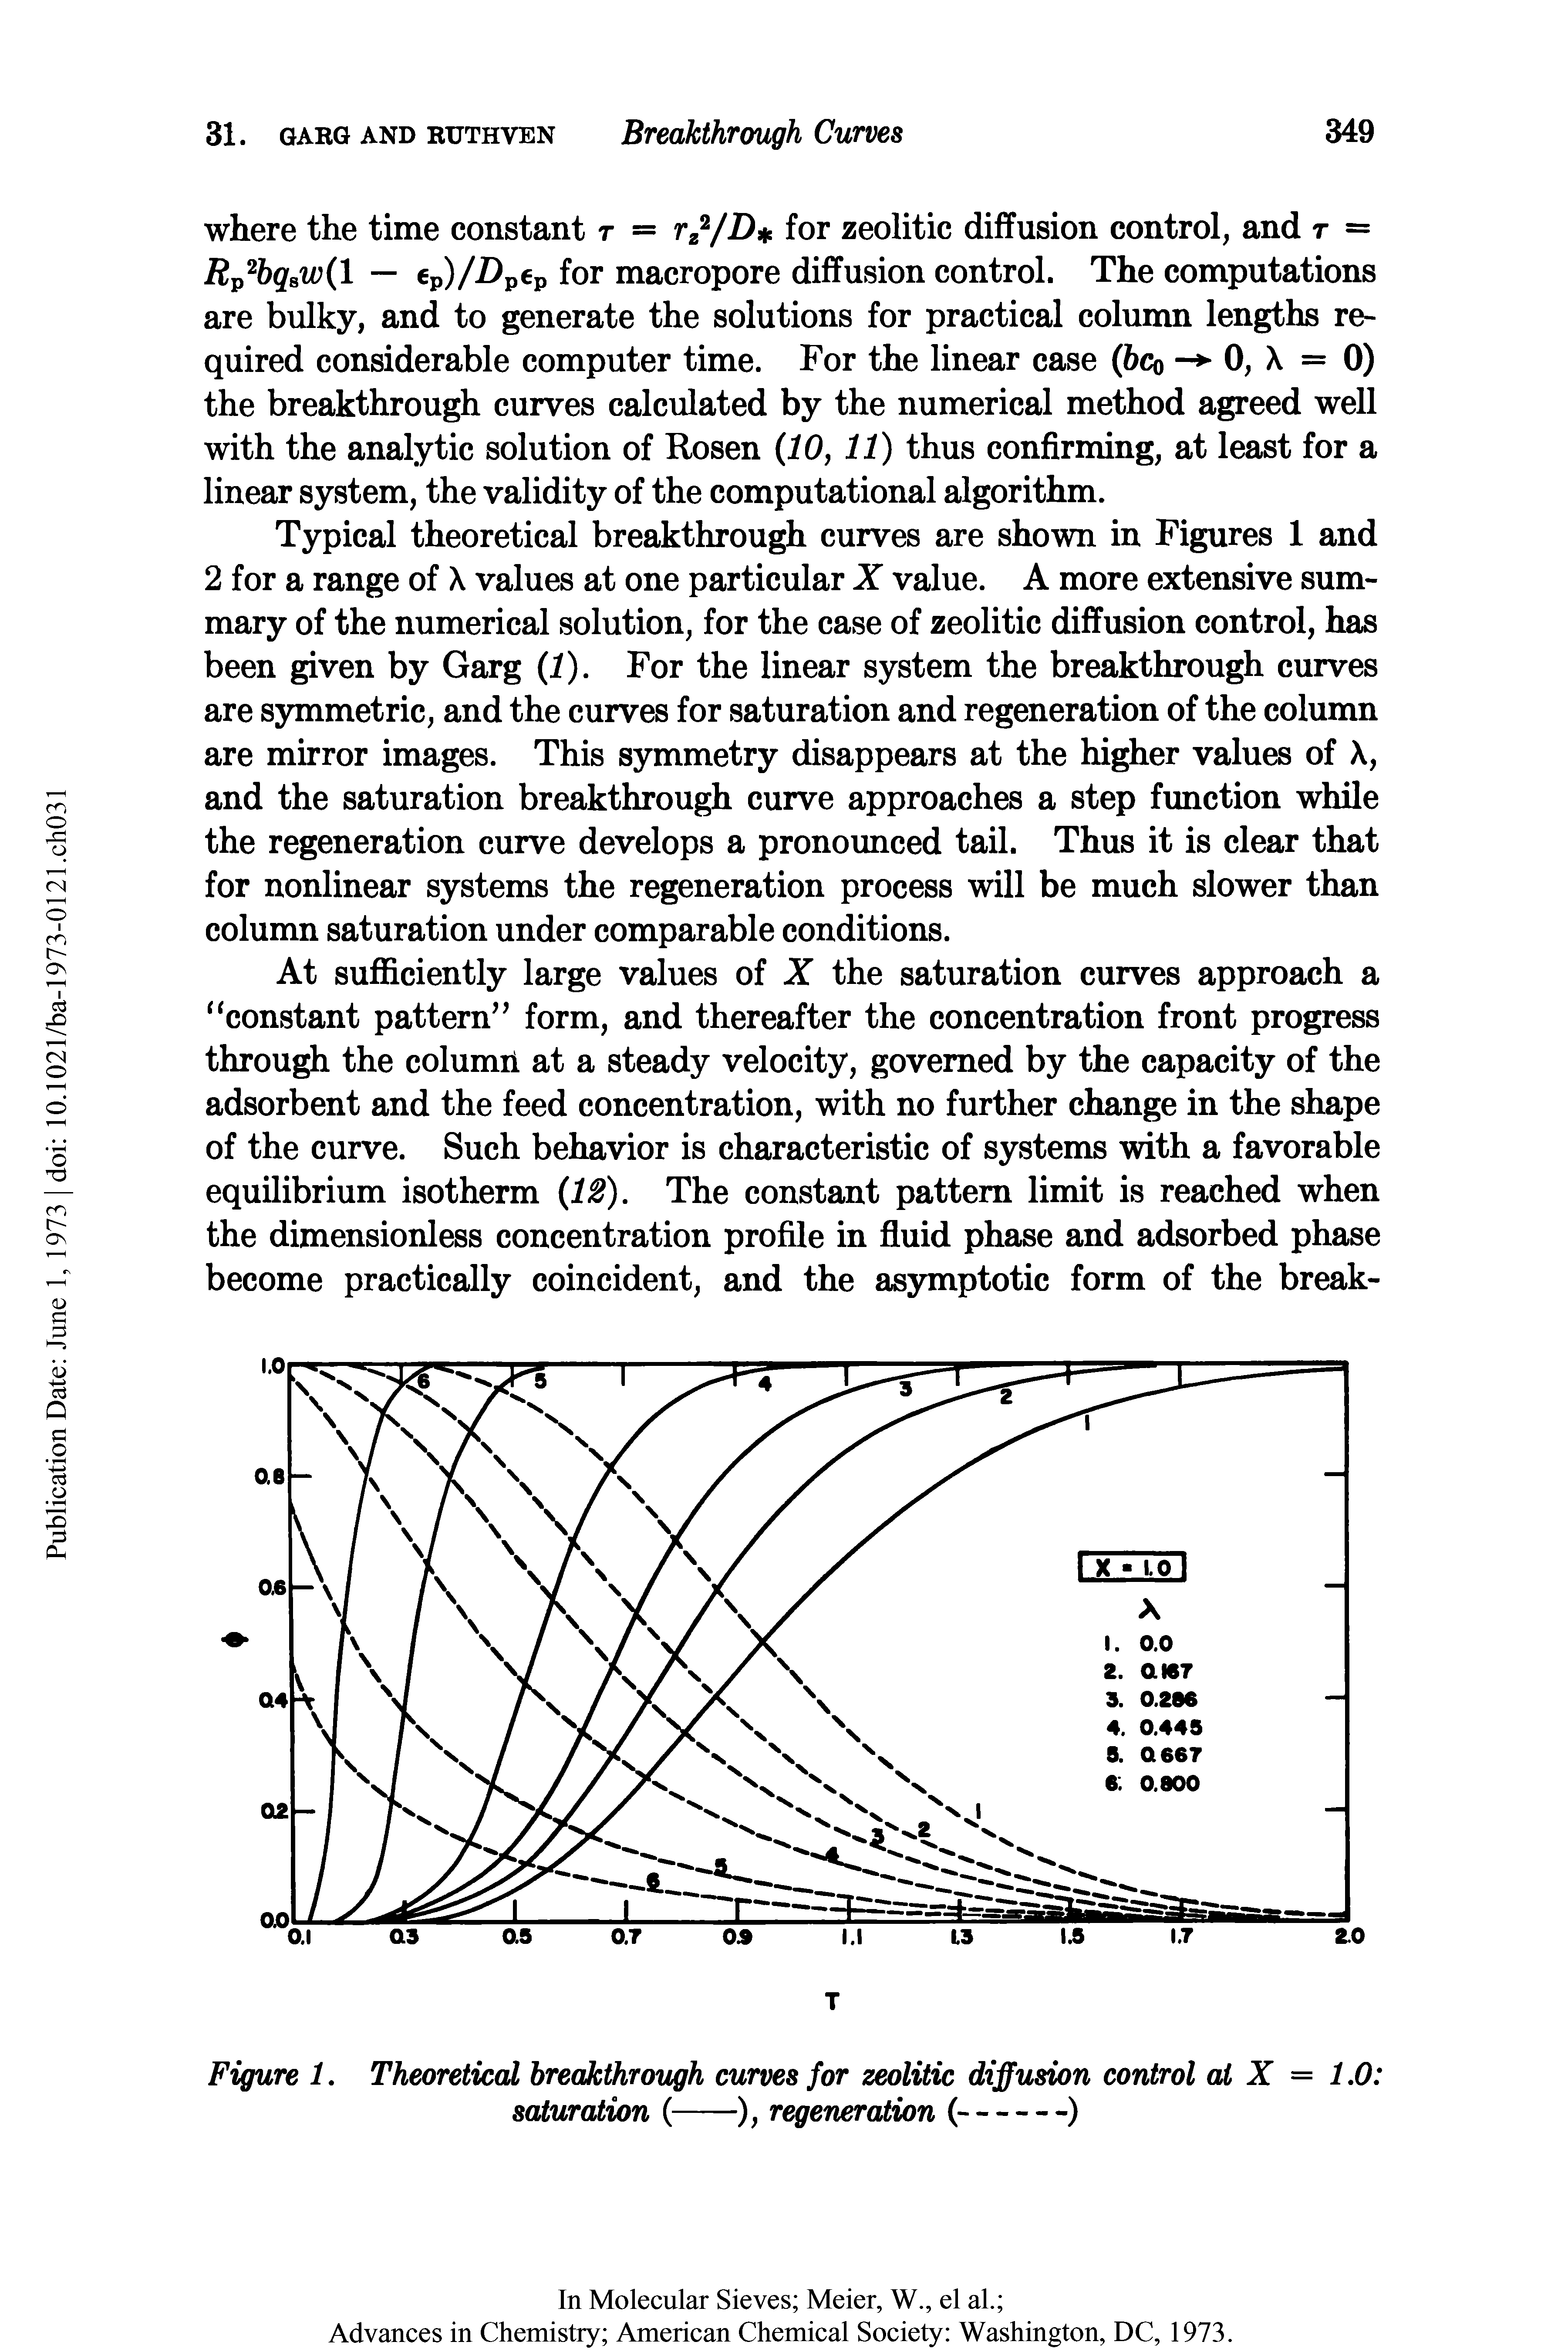 Figure 1. Theoretical breakthrough curves for zeolitic diffusion control at X = 1.0 saturation (-------------------------), regeneration (------)...